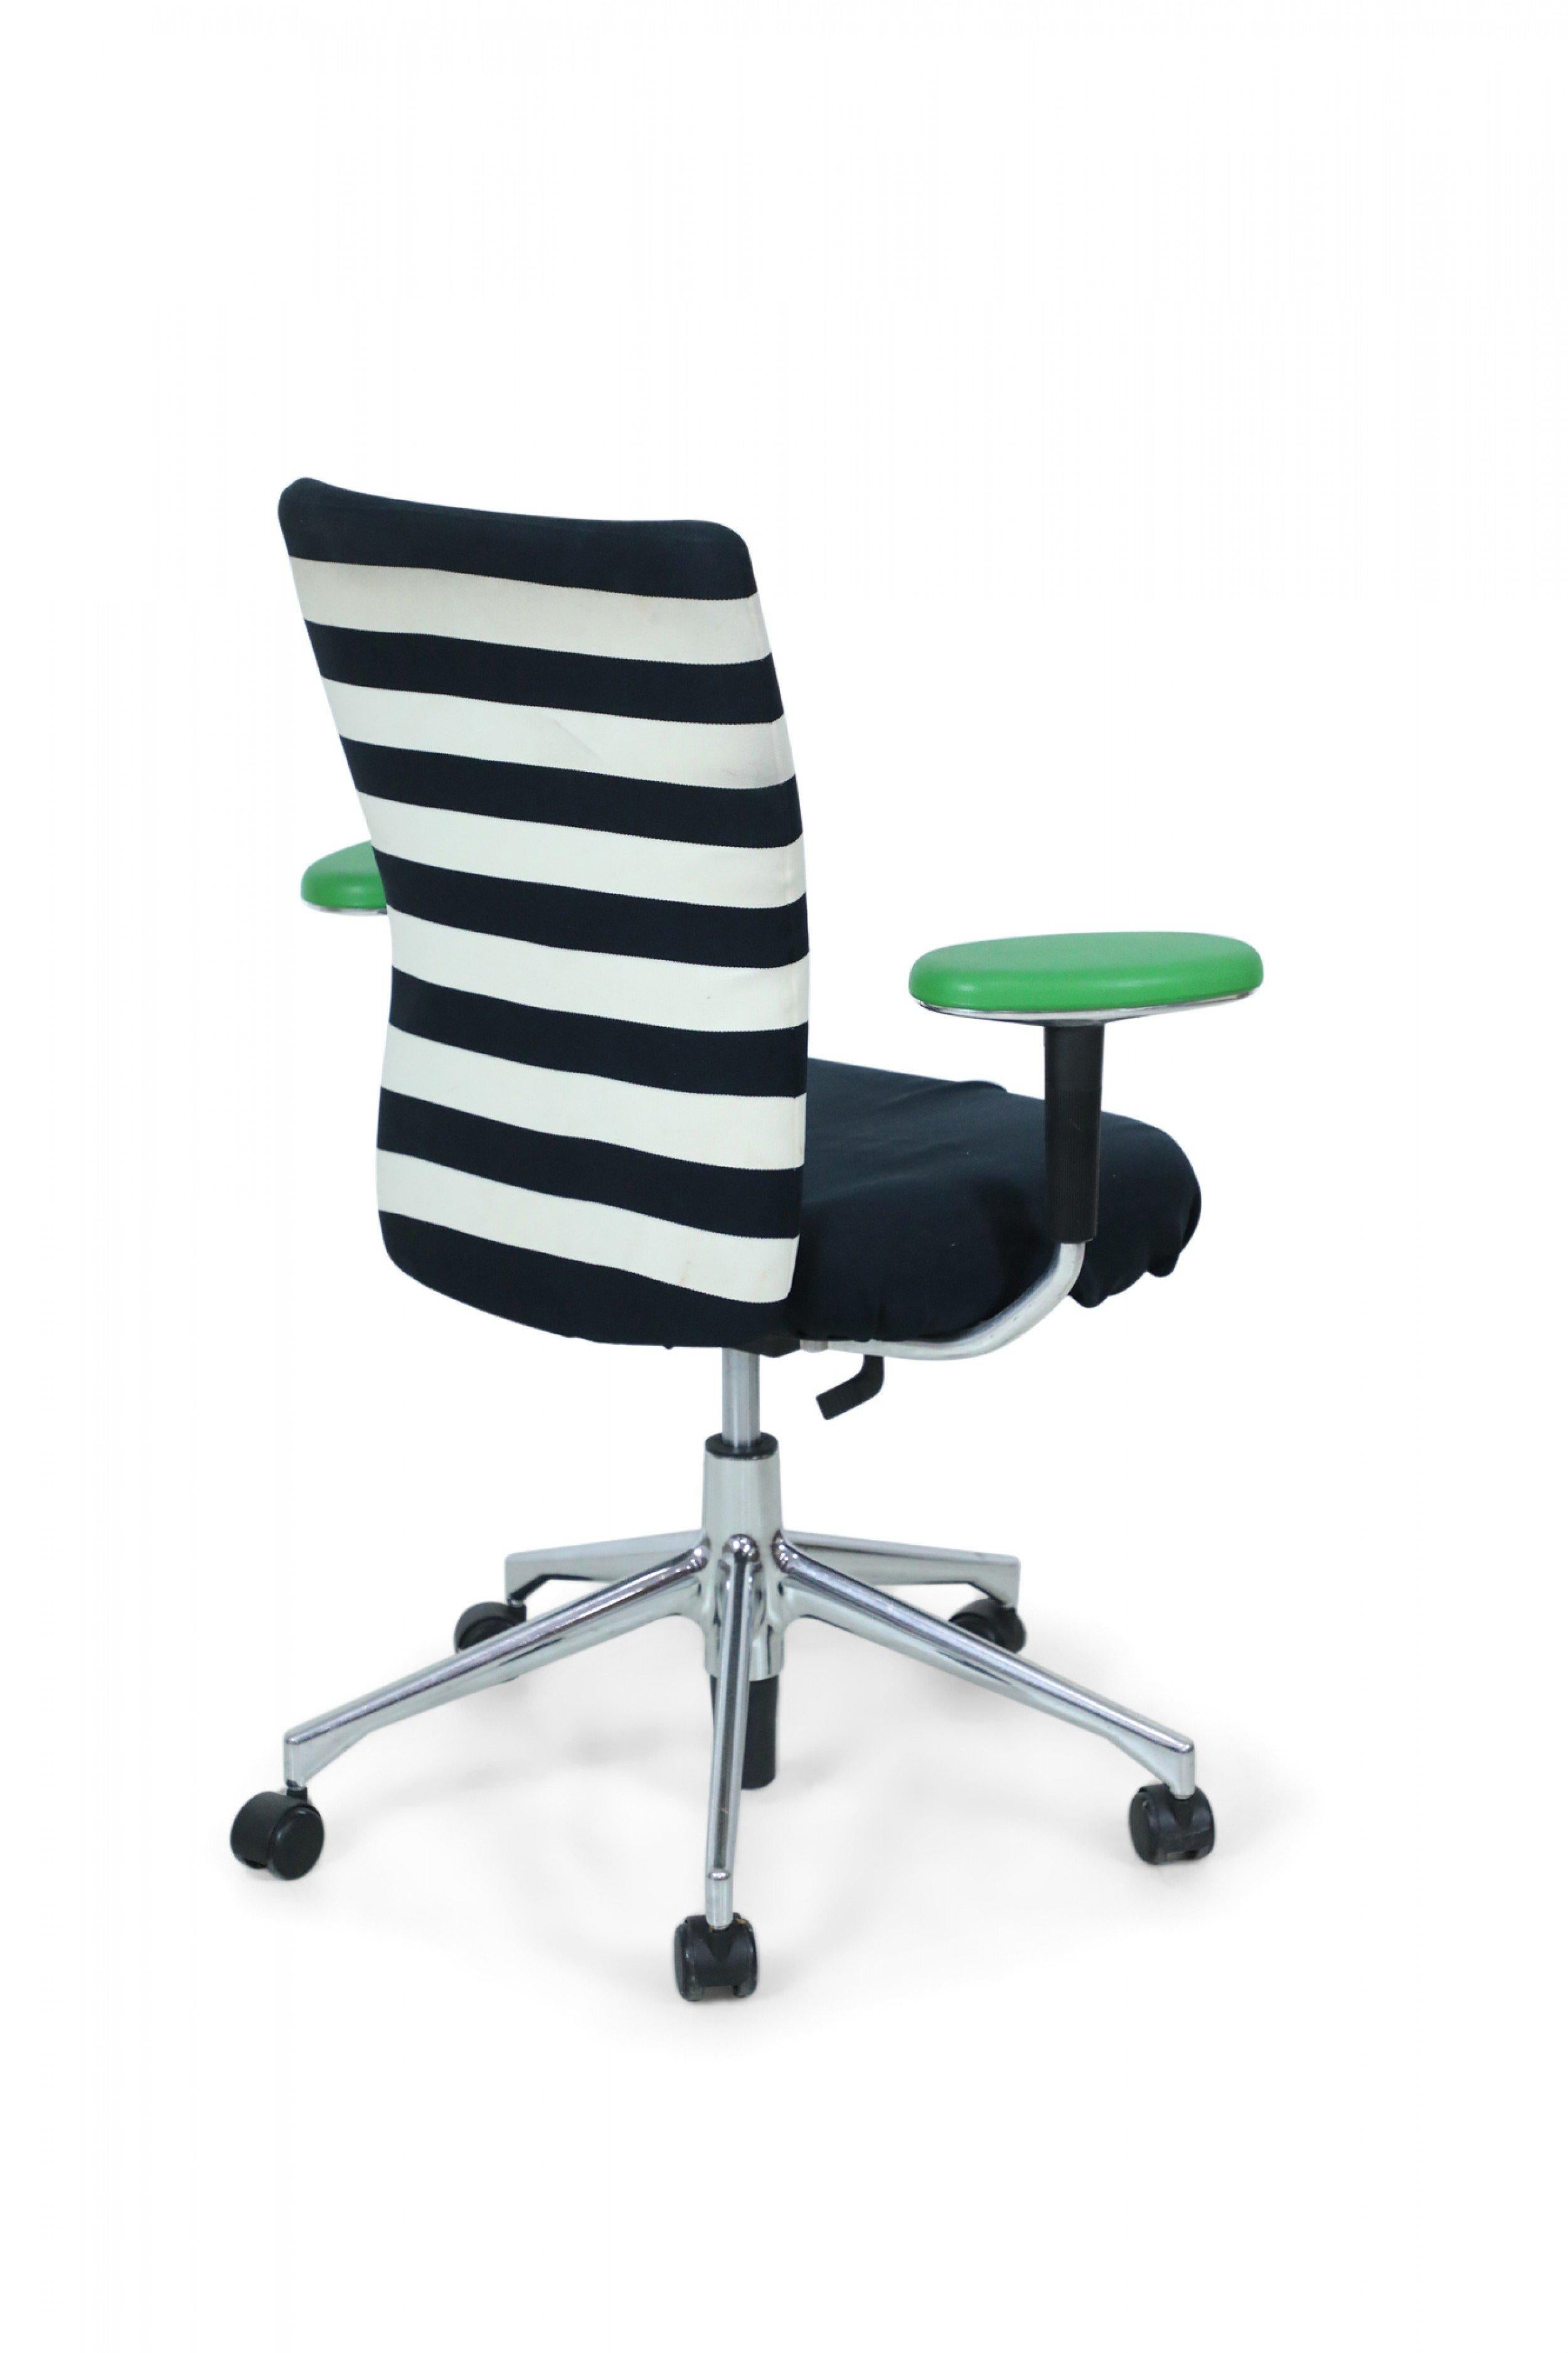 Fabric Contemporary Black and White Striped Swivel Office Armchairs For Sale